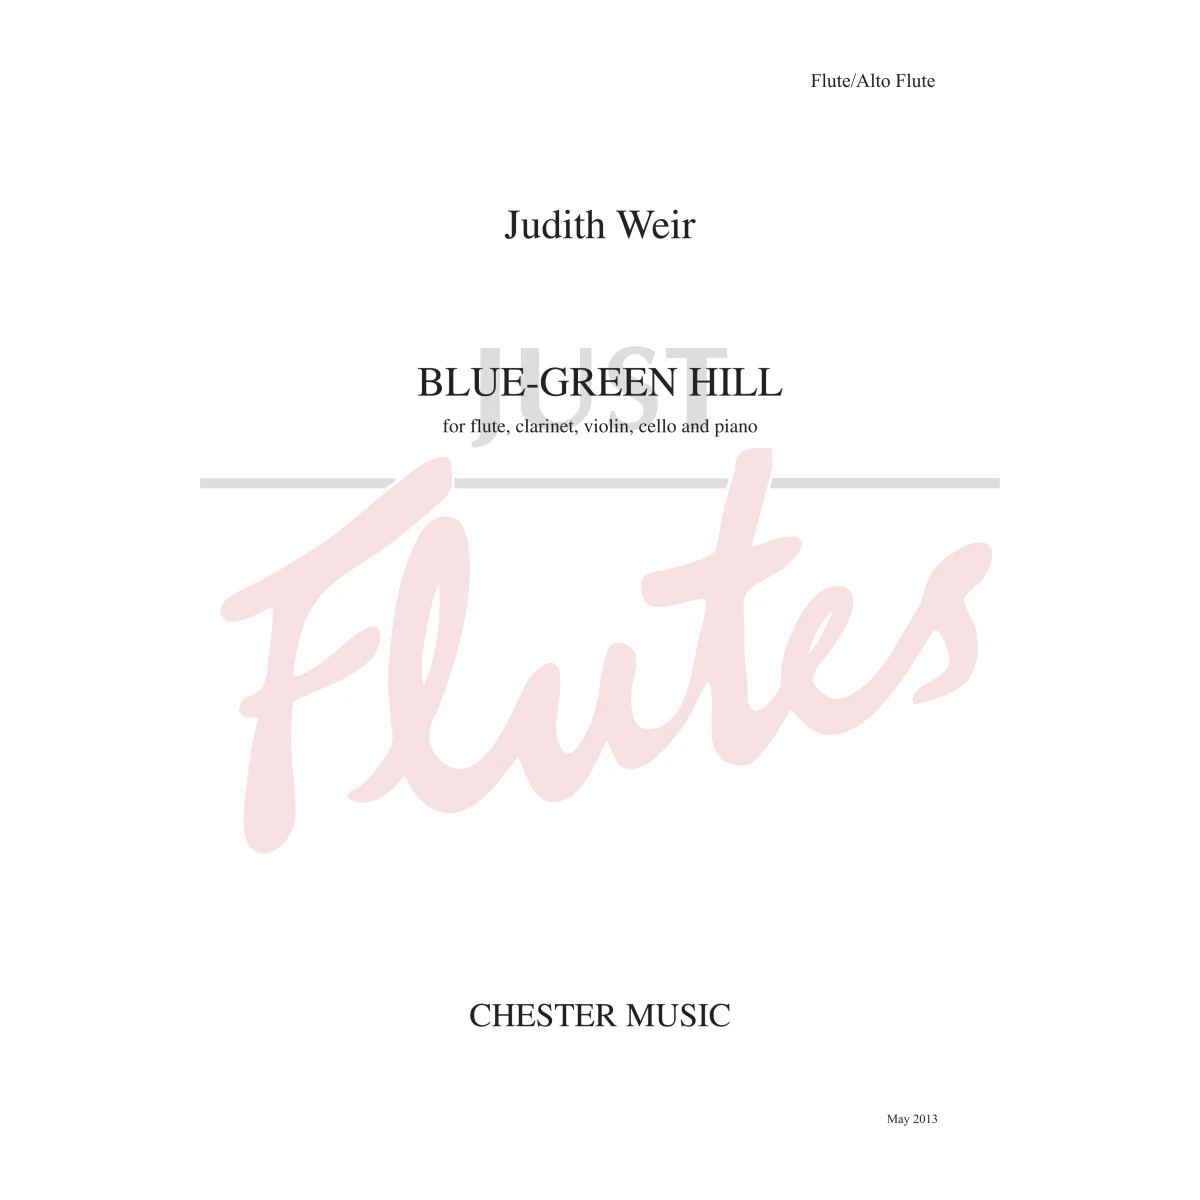 Blue-Green Hill for Flute, Clarinet, Violin and Cello